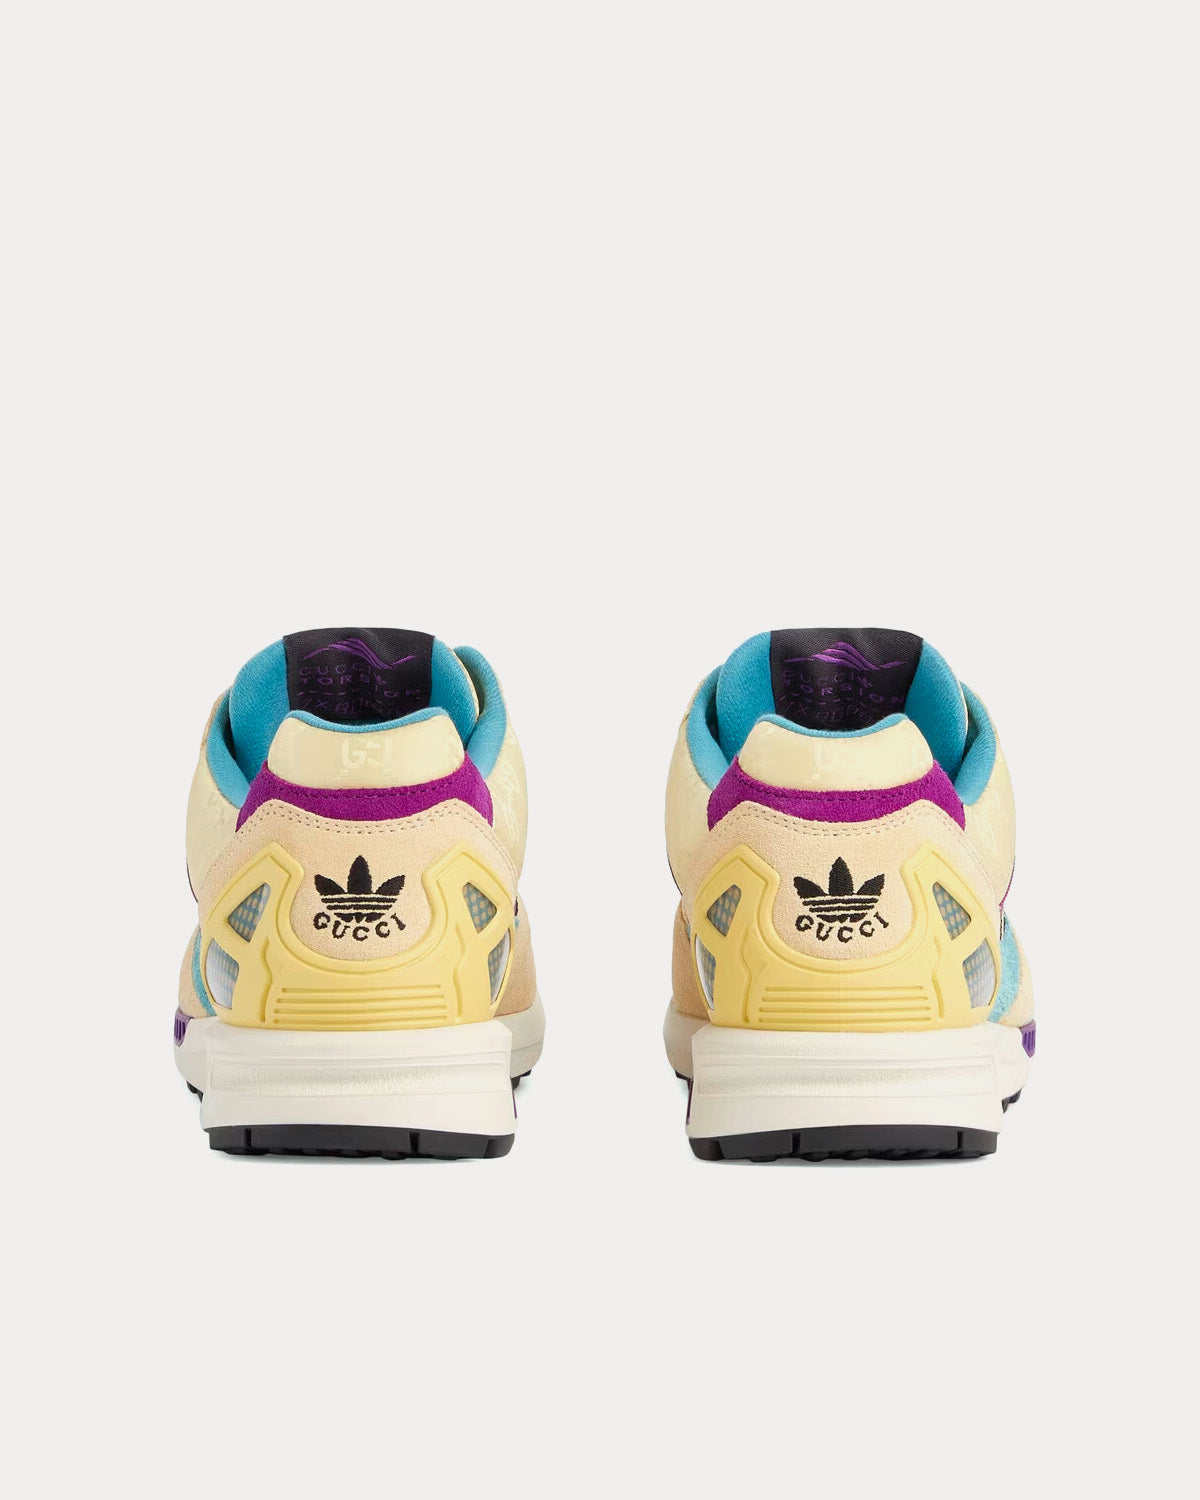 Adidas x Gucci ZX8000 GG Canvas Beige / Purple Low Top Sneakers 